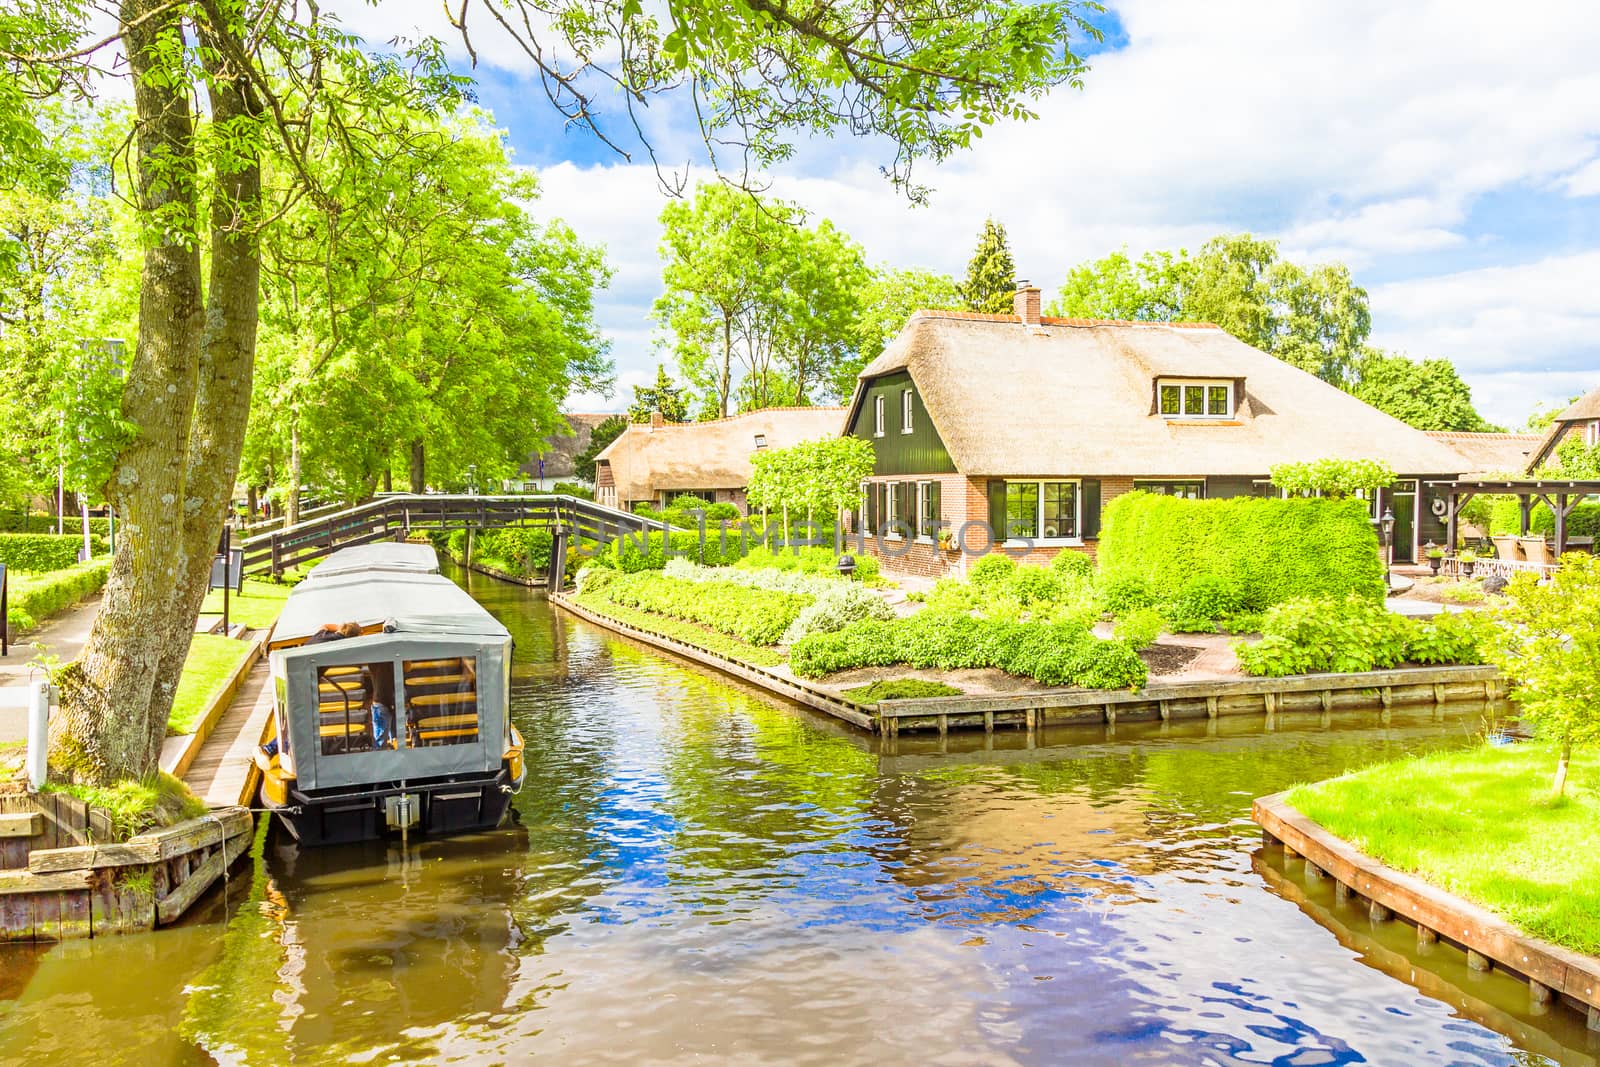 Typical Dutch houses and gardens in Giethoorn, The Netherlands by gianliguori